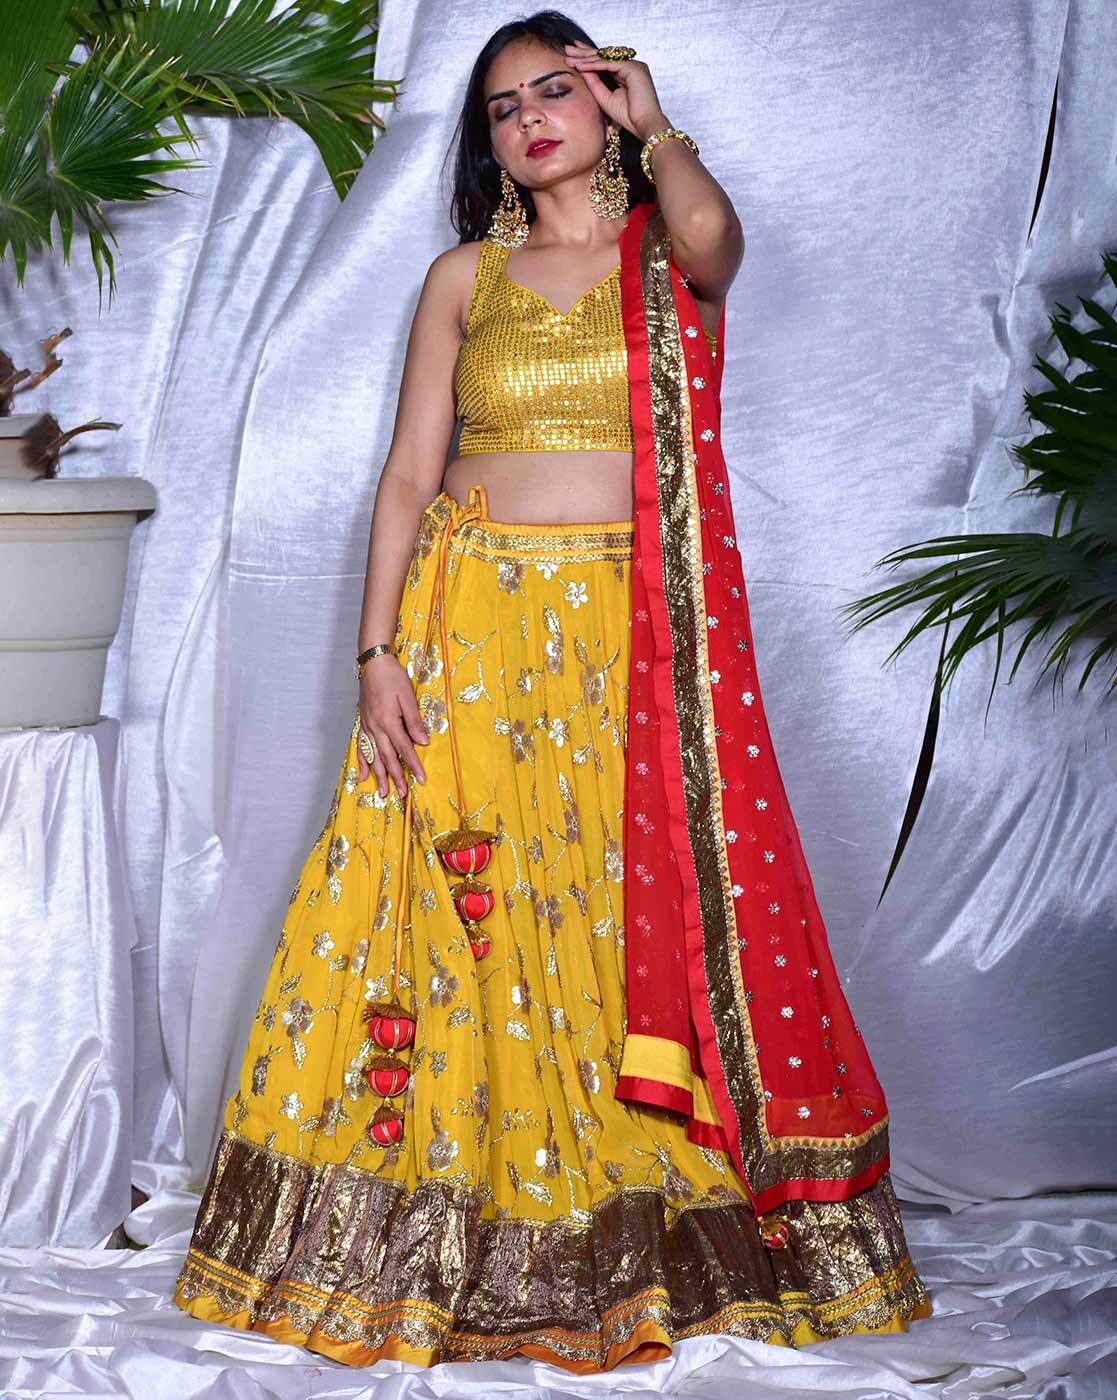 Buy Red Lehenga with Red Blouse and Golden Dupatta Online |  DressingStylesCA.com